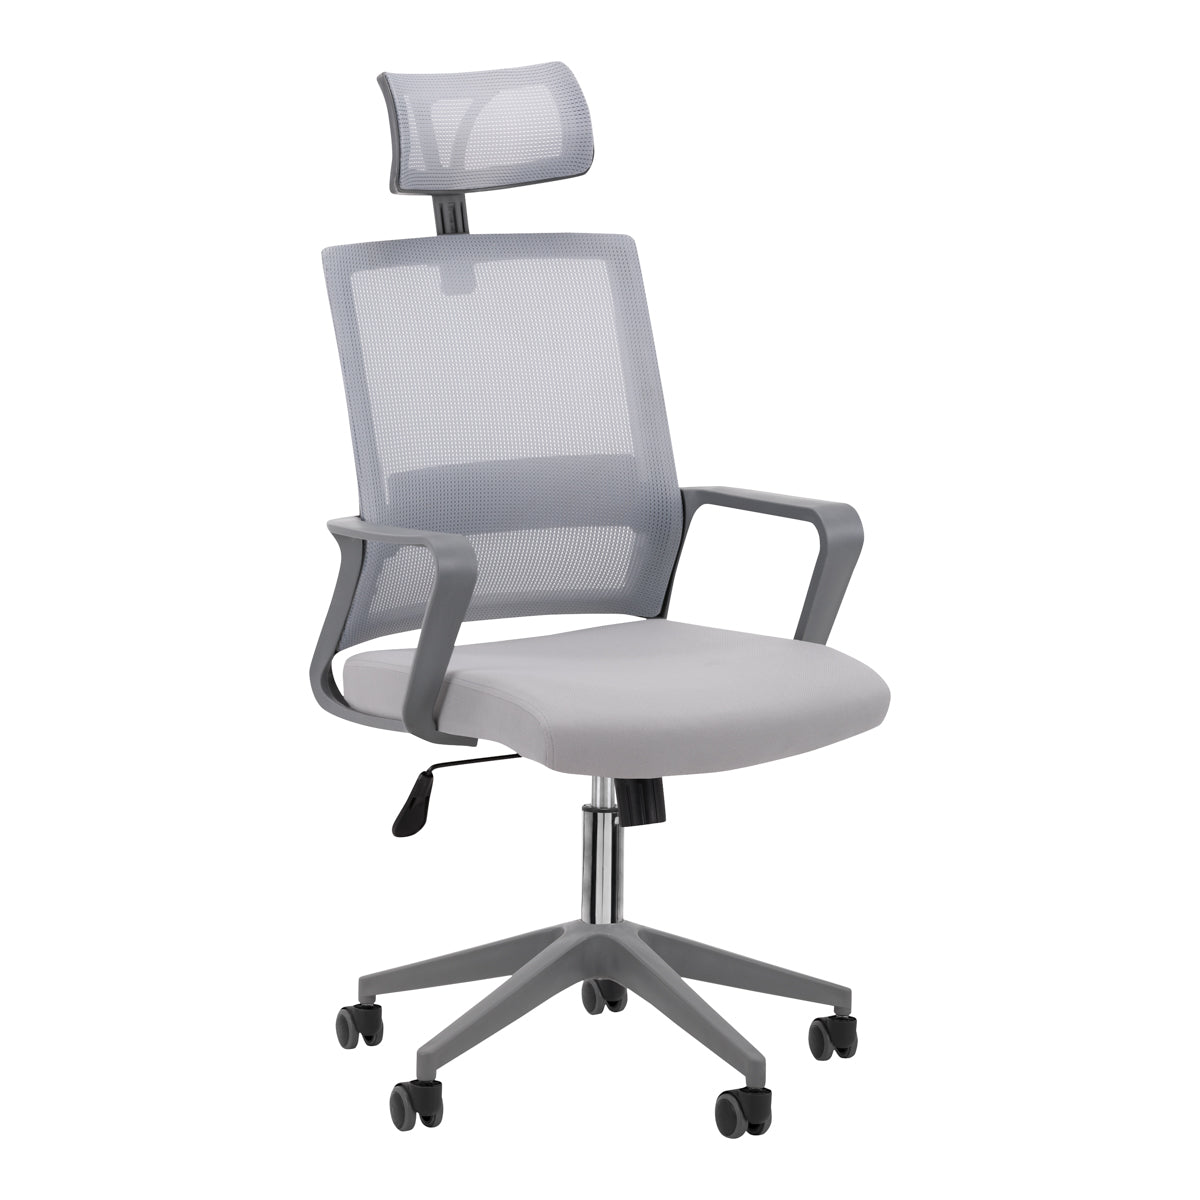 ActiveShop Office / Manicure Chair QS-05 Grey